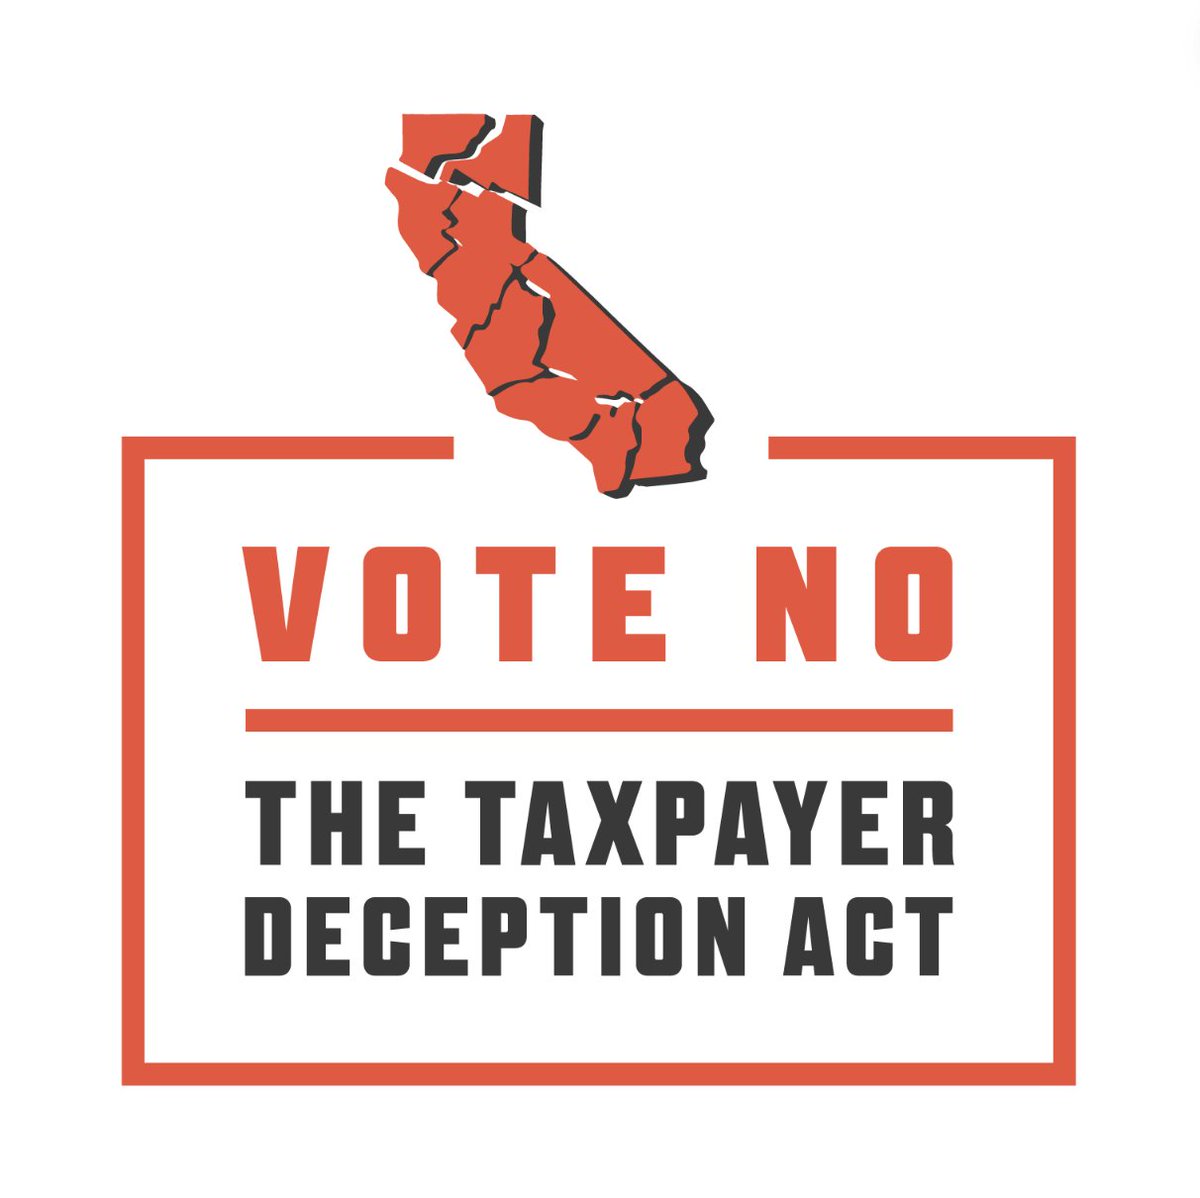 🚨 The Taxpayer Deception Act could: -Overturn 100+ voter-approved laws. -Cut $1B/yr for infrastructure, risking safety. -Increase class sizes in schools. -Slash funds for local services. -Shift tax burdens to regular Californians For these reason and more, #VoteNoOnTDA